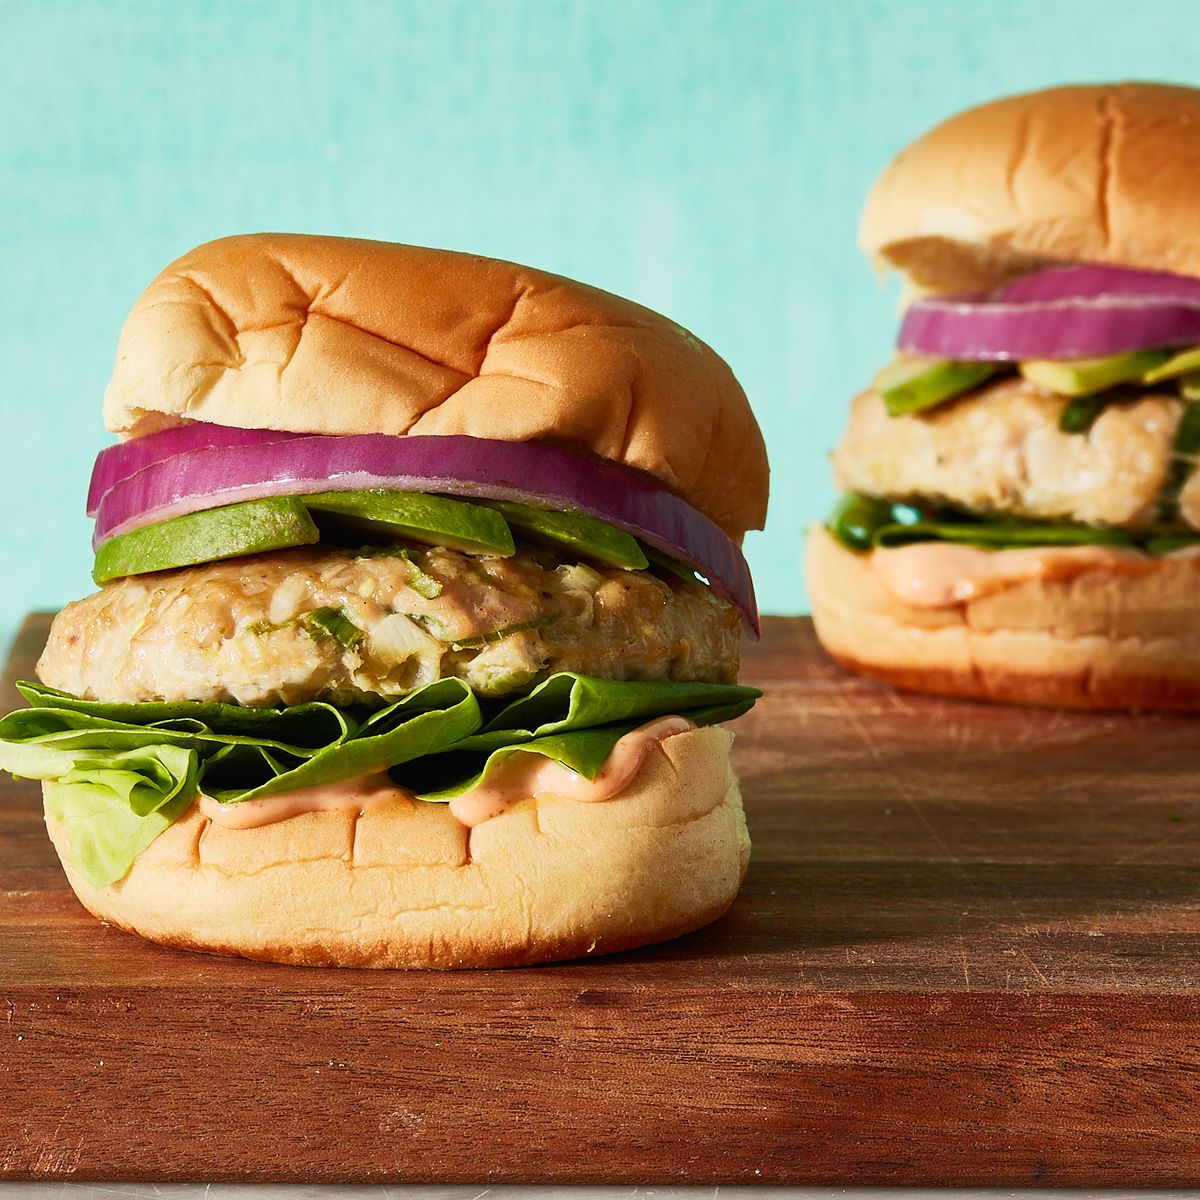 Our Favorite Turkey Burger Recipe (With Video)